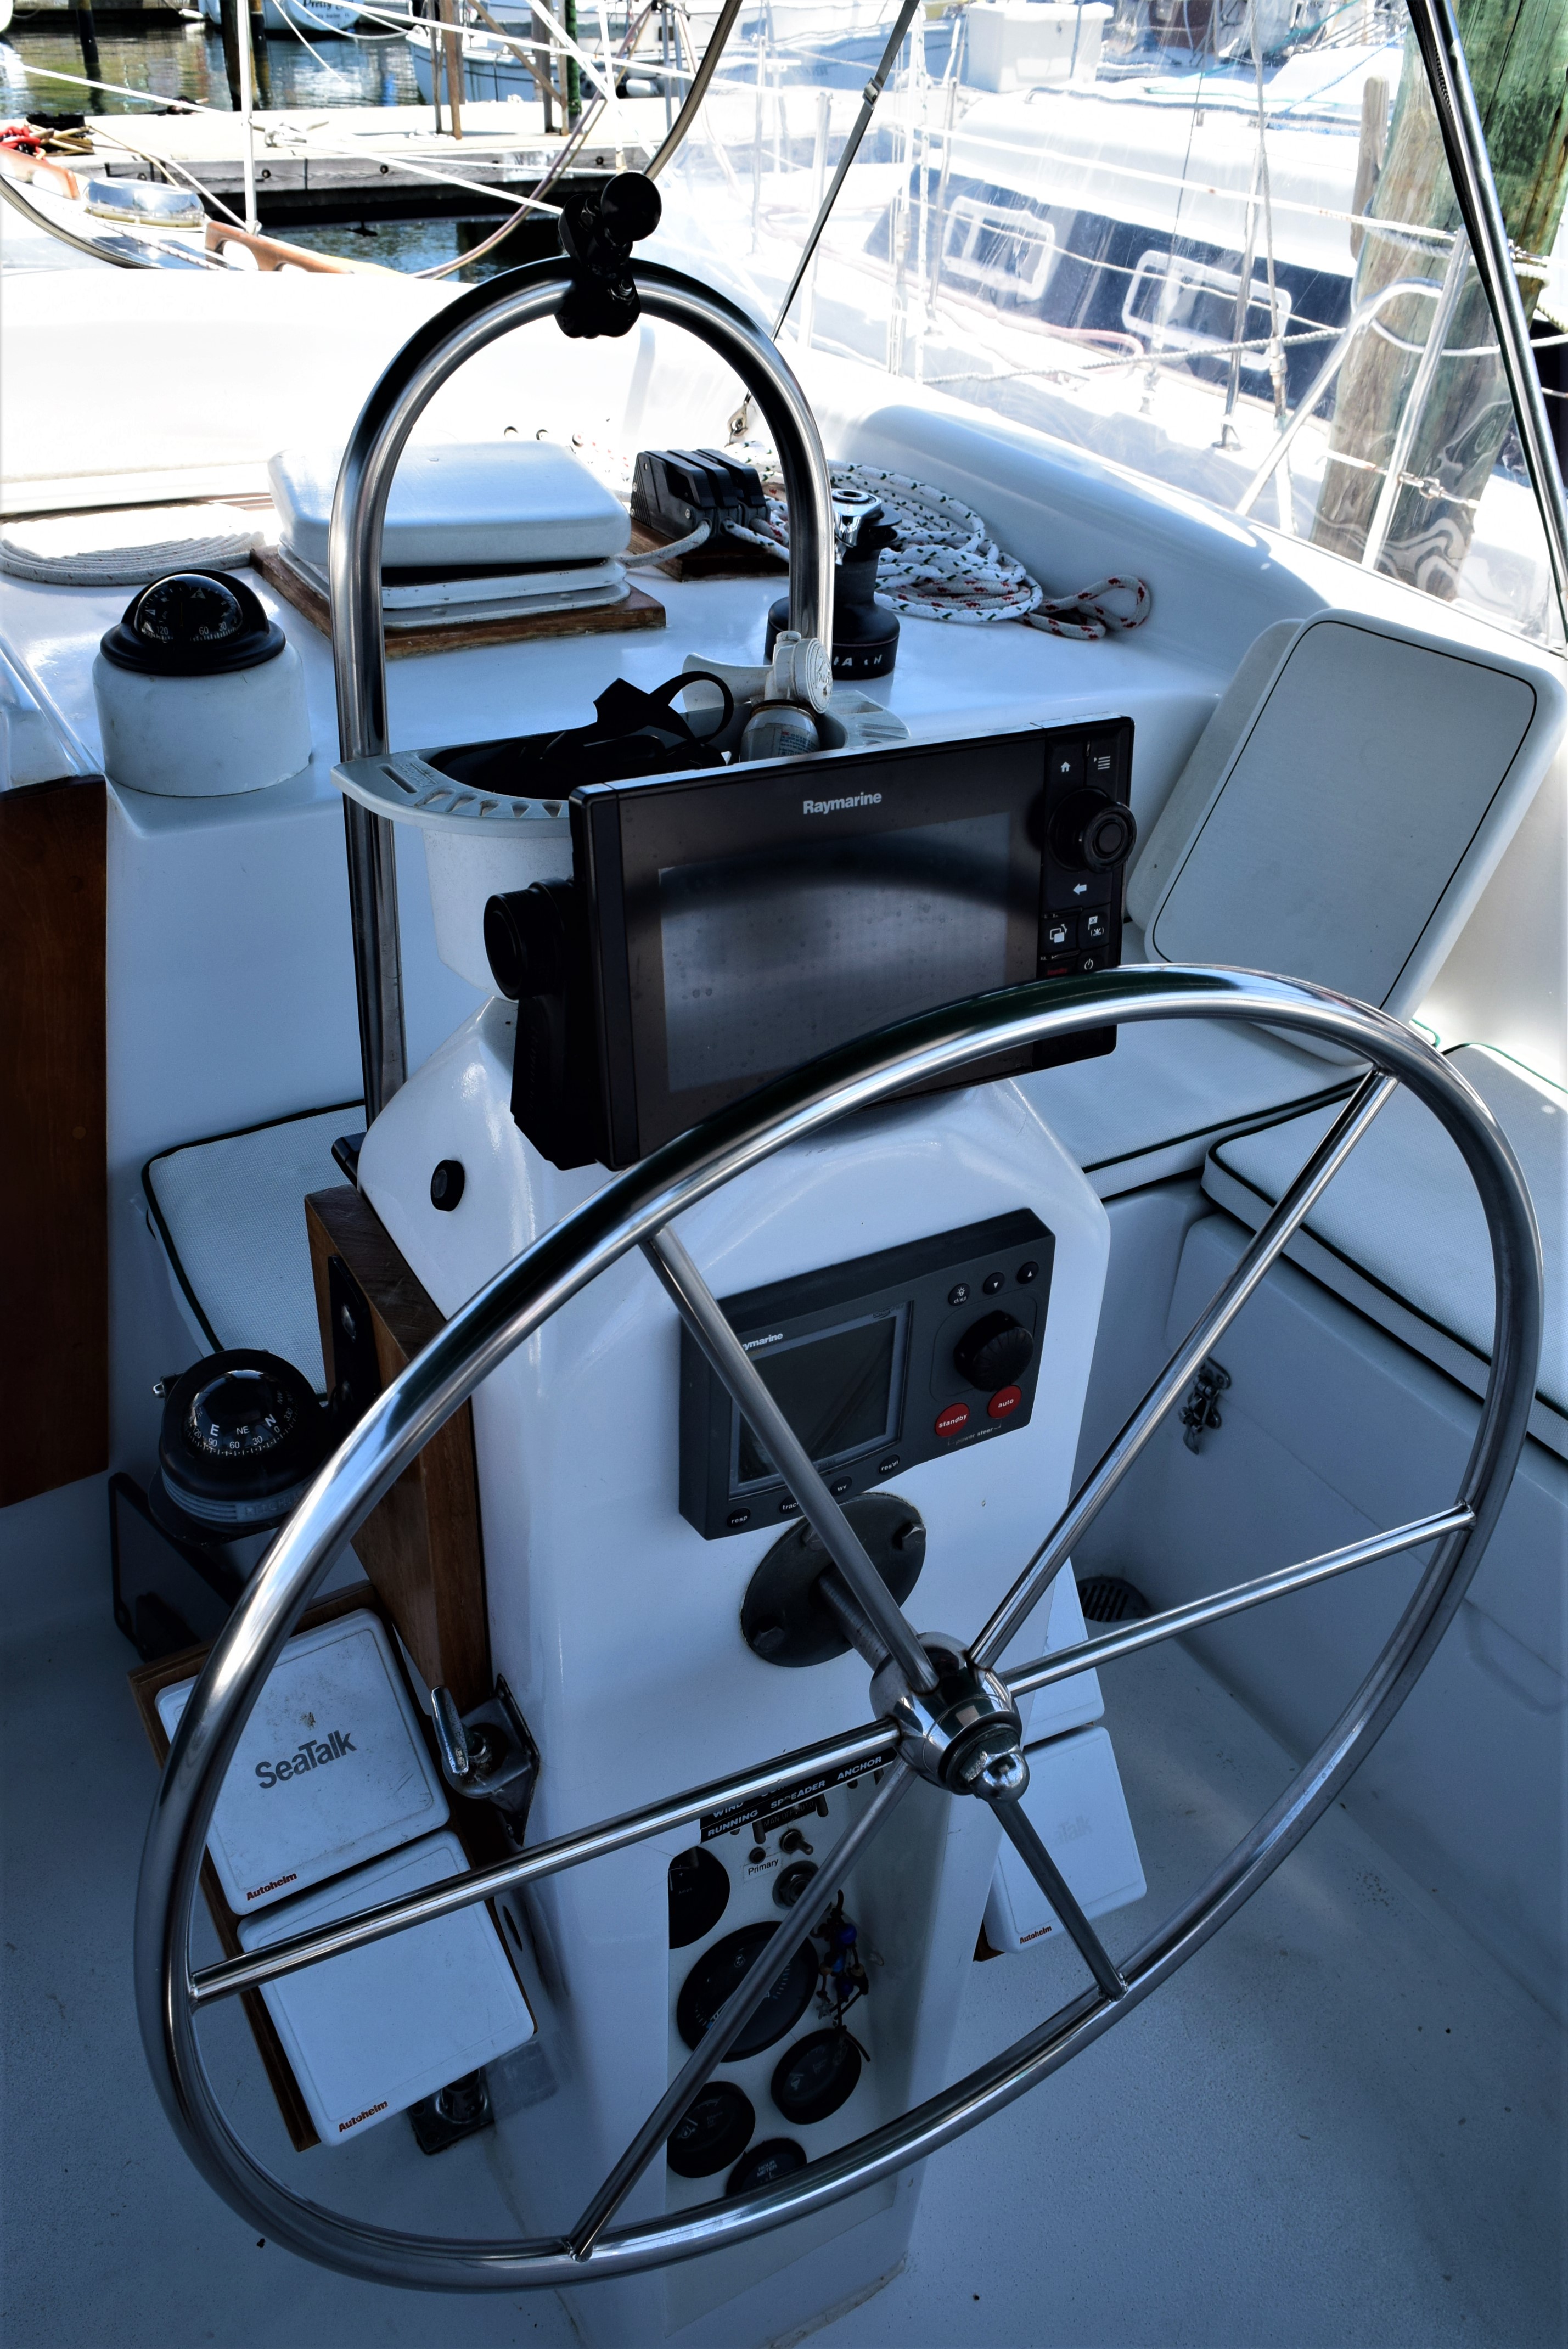 1979 Morgan 415 Out Island Ketch Sailboat for sale in St Petersburg, FL - image 28 